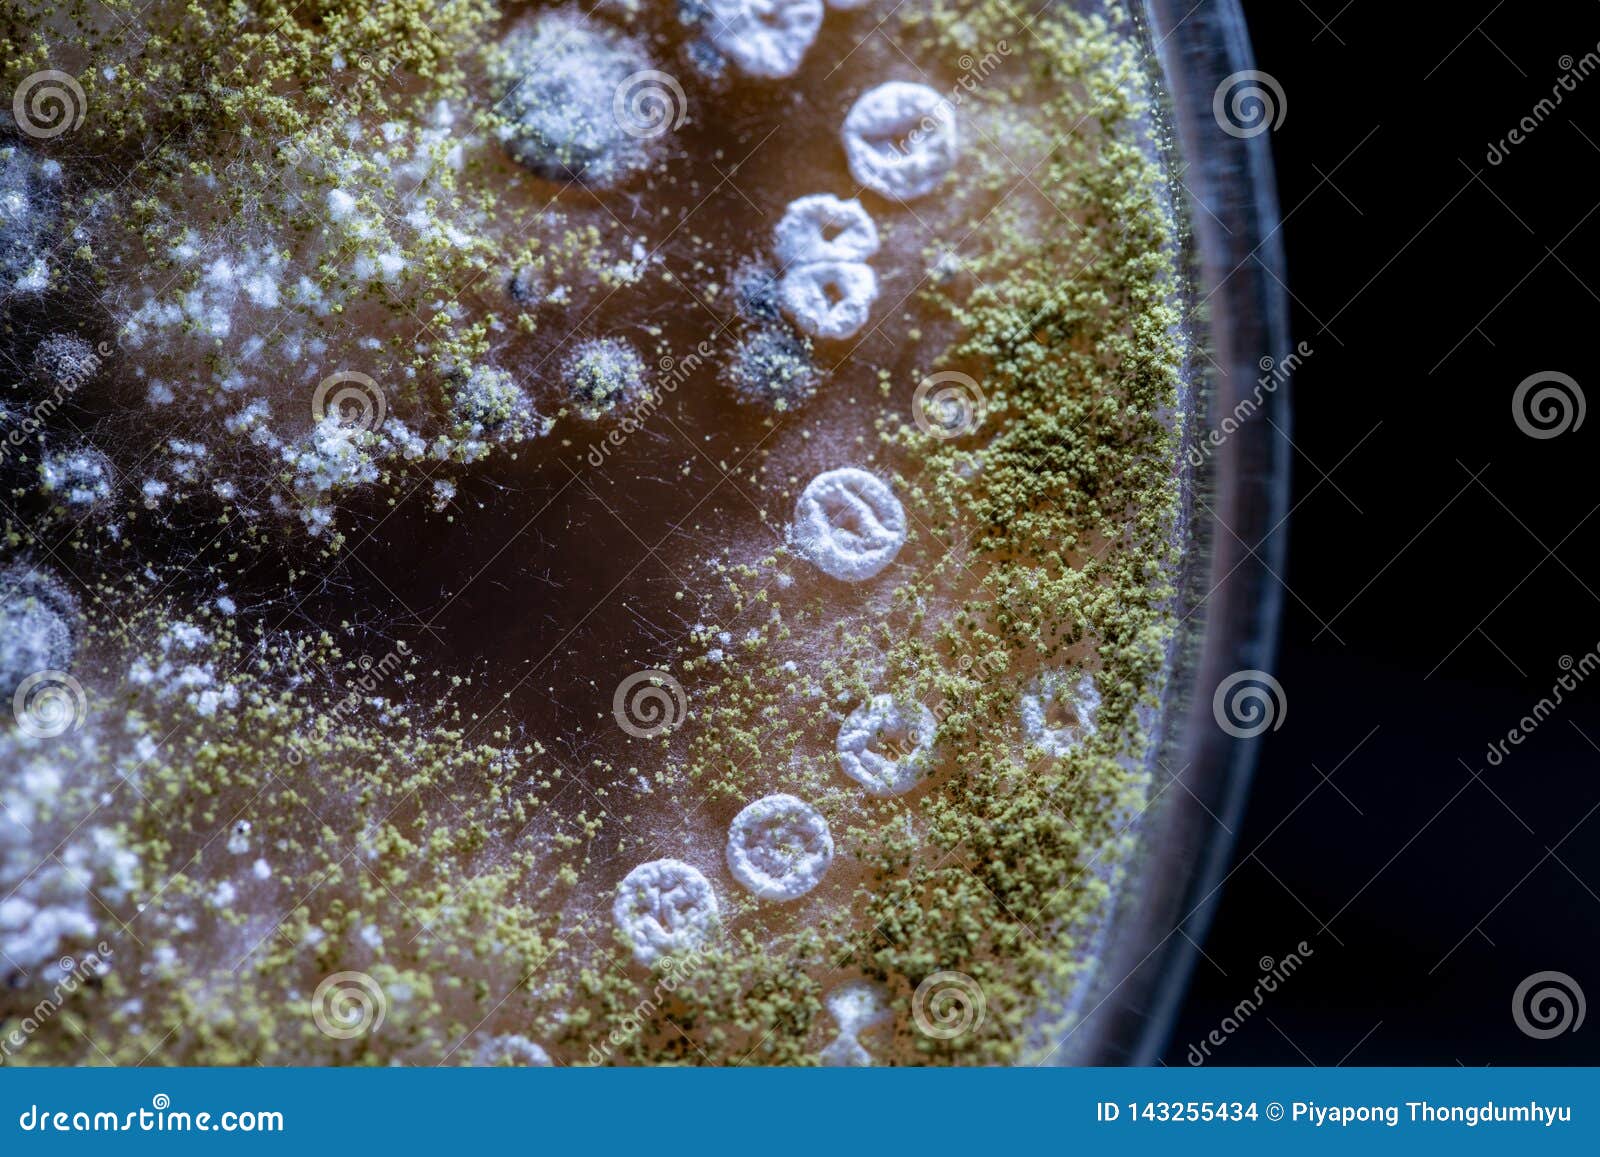 characteristic of actinomyces, bacteria, yeast and mold on selective media from soil samples for study in laboratory microbiology.